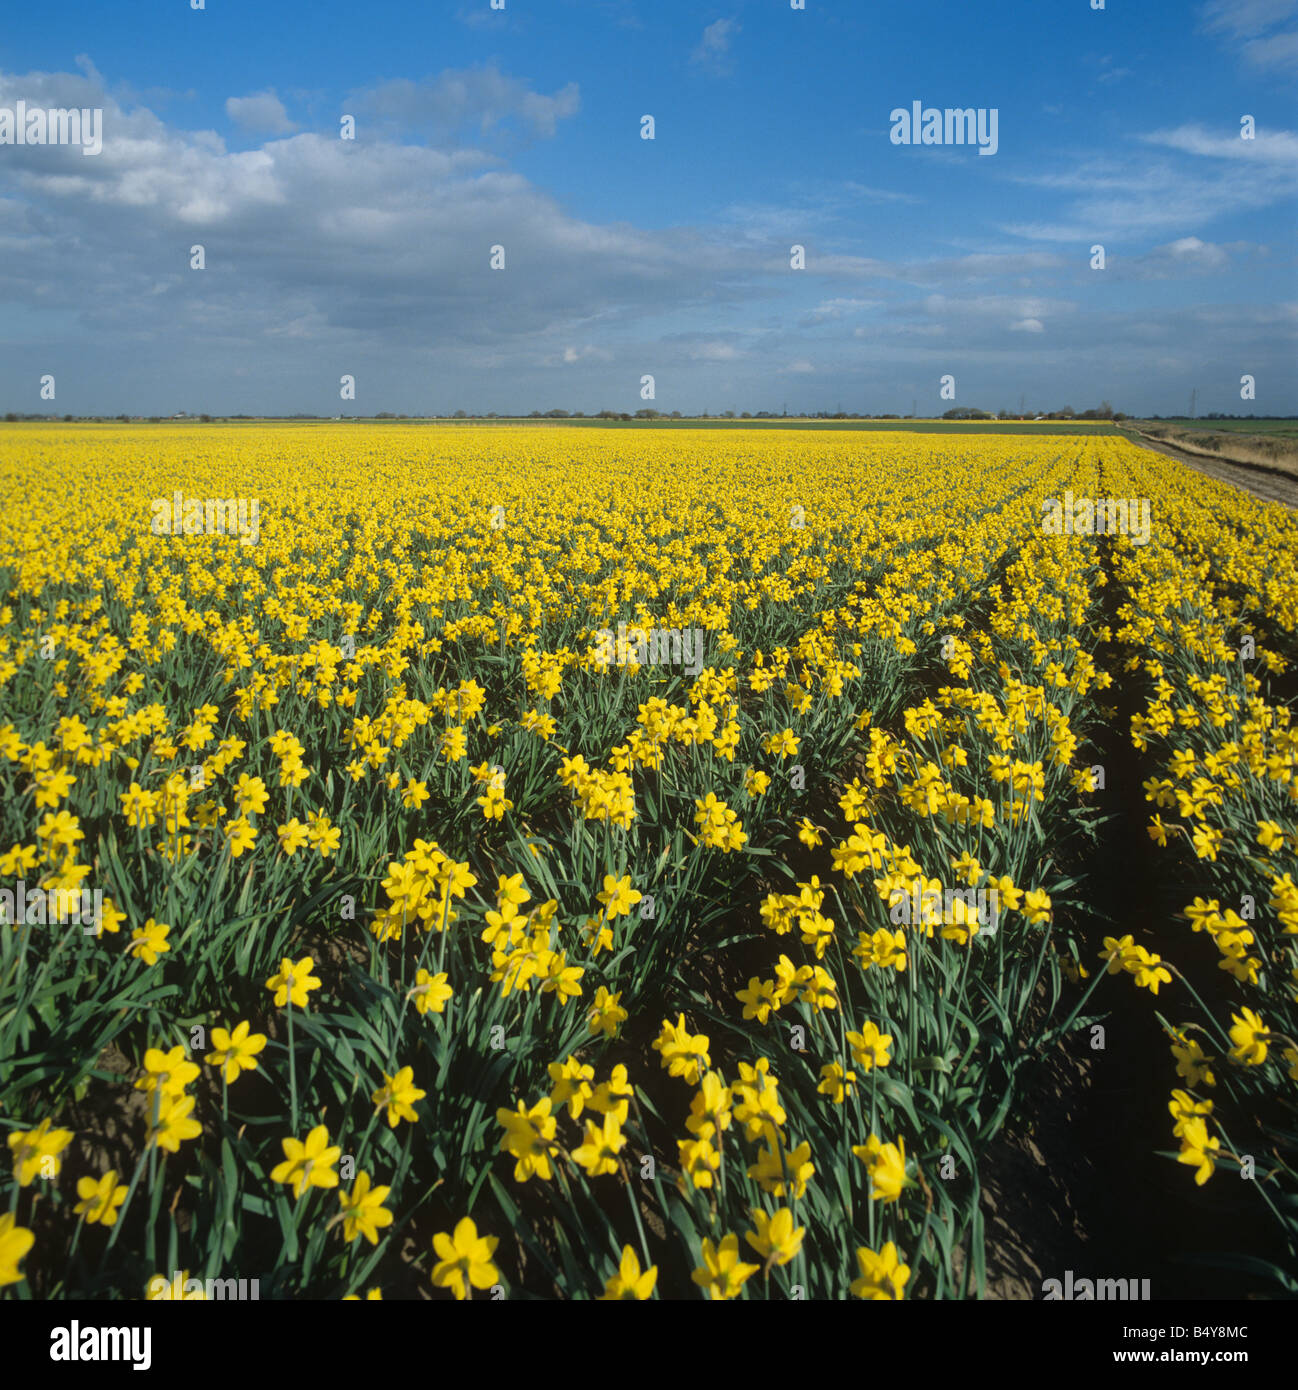 Flowering commercial daffodil Narcissus crop in the Lincolnshire fens Stock Photo